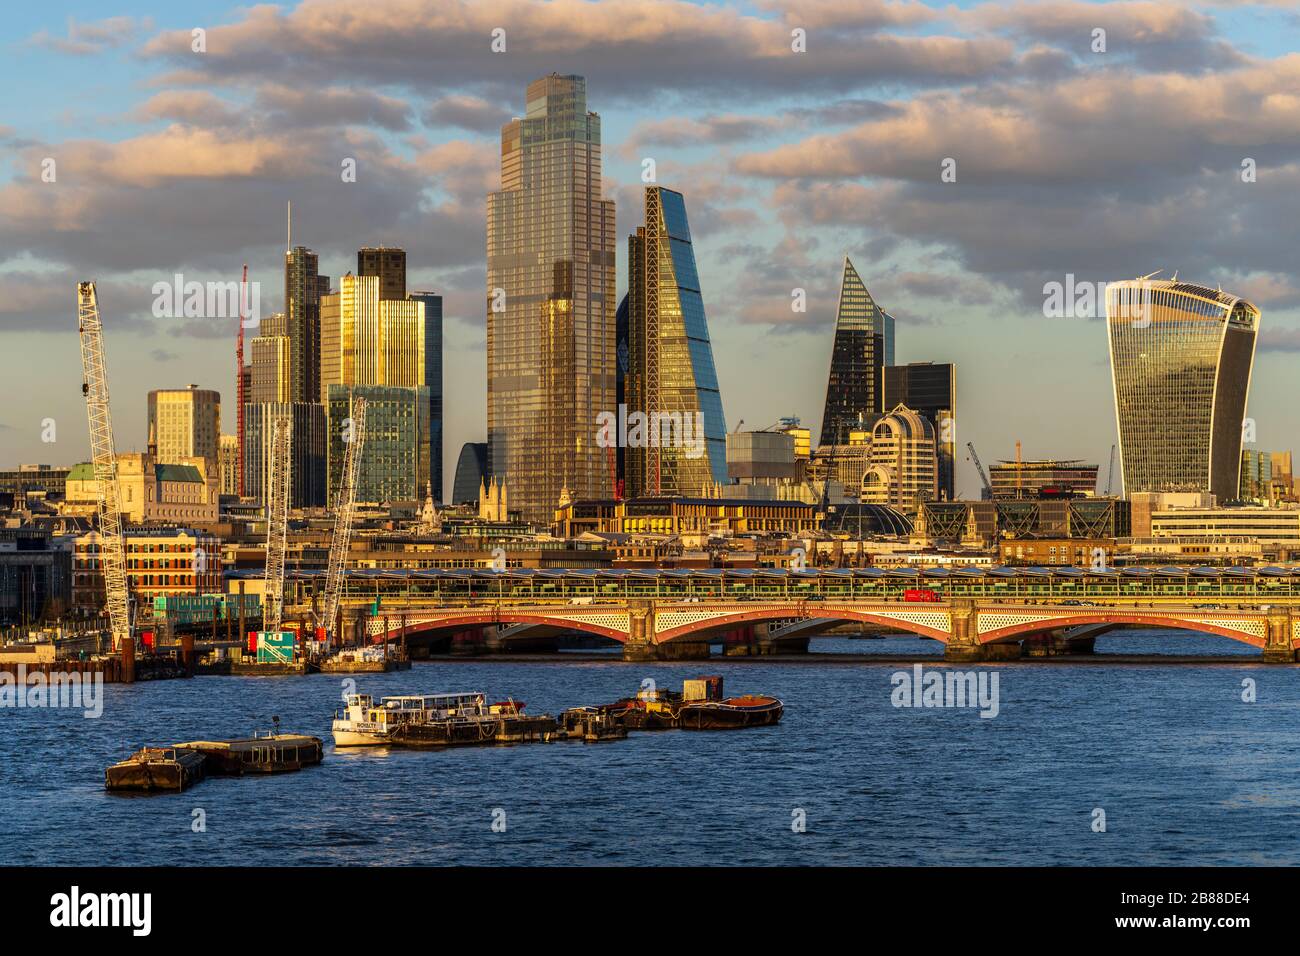 City of London Financial District Skyscrapers and new buildings across the River Thames. Thames Riverscape. London Riverscape. Stock Photo